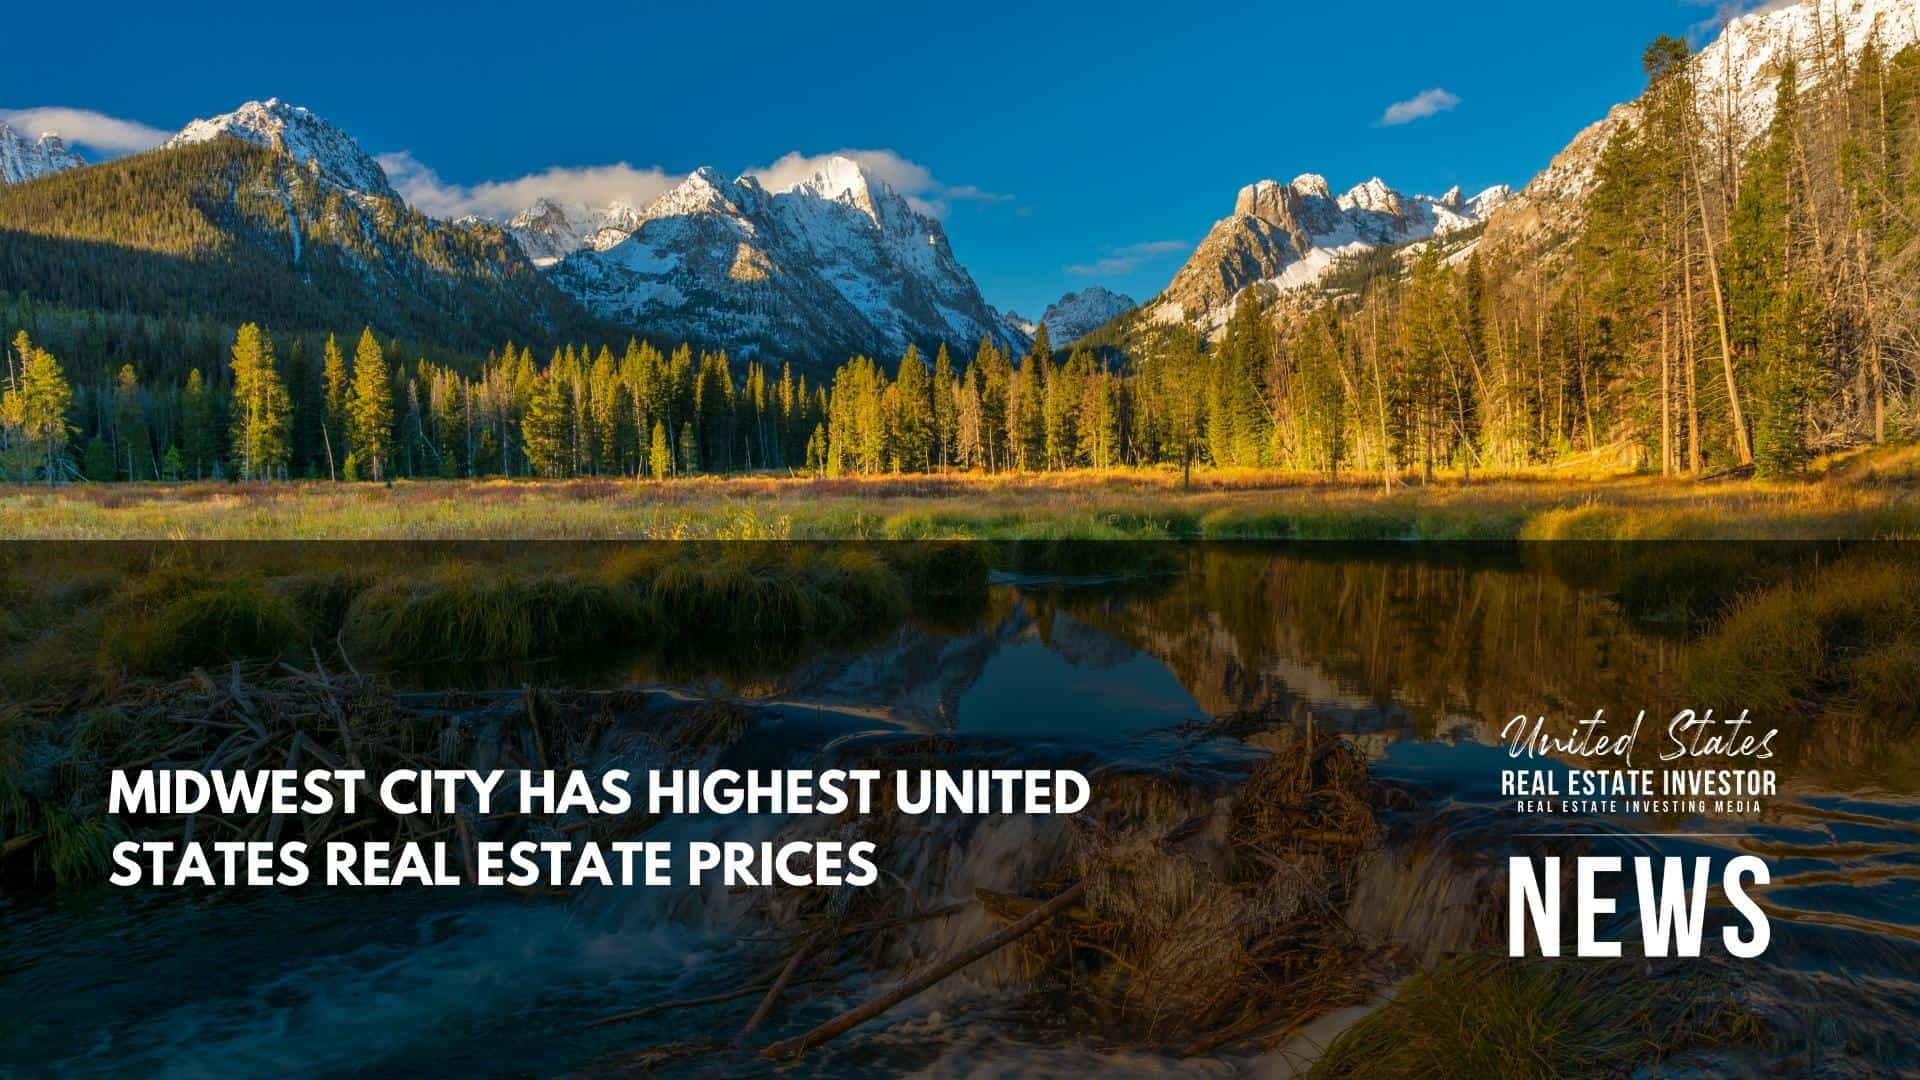 United States Real Estate Investor - Real estate investing media - Midwest City Has Highest United States Real Estate Prices